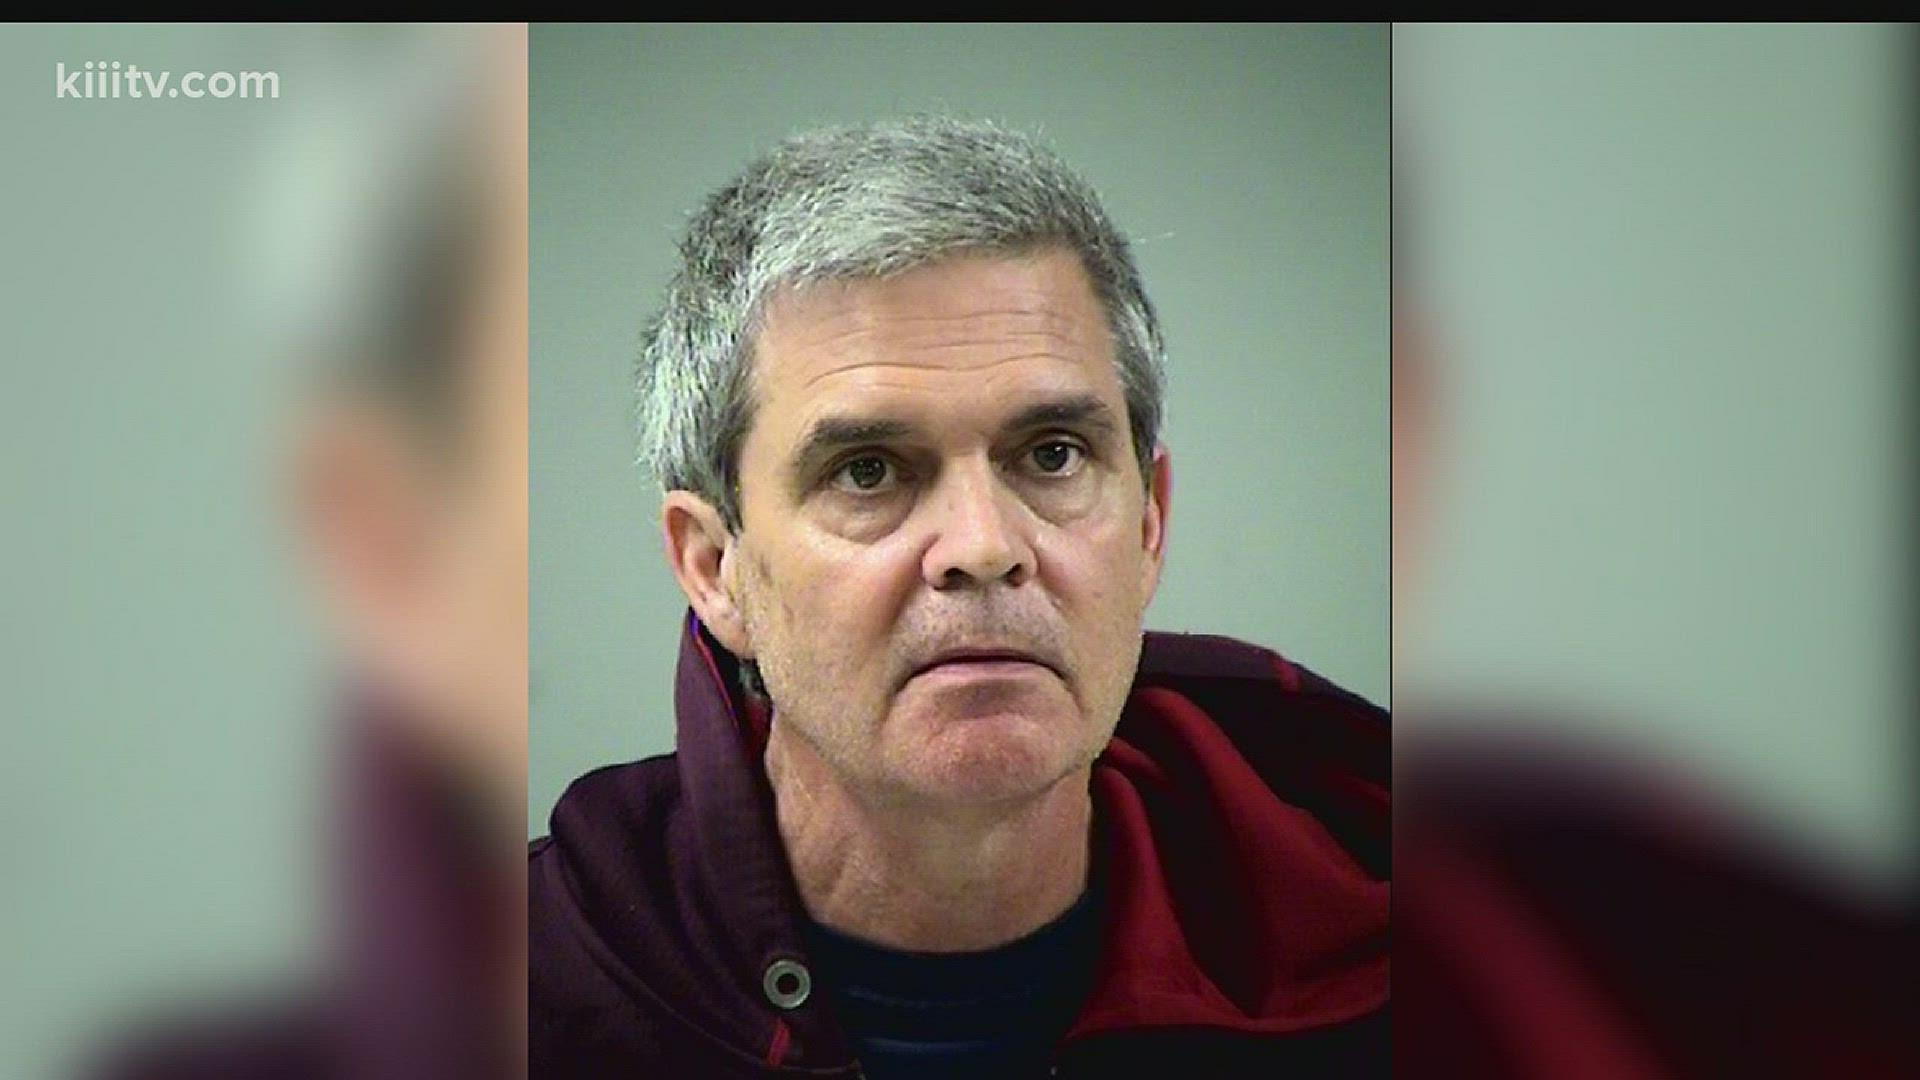 A former South Texas Catholic priest convicted of raping a 13-year-old girl less than a decade ago will likely spend the rest of his days behind bars.